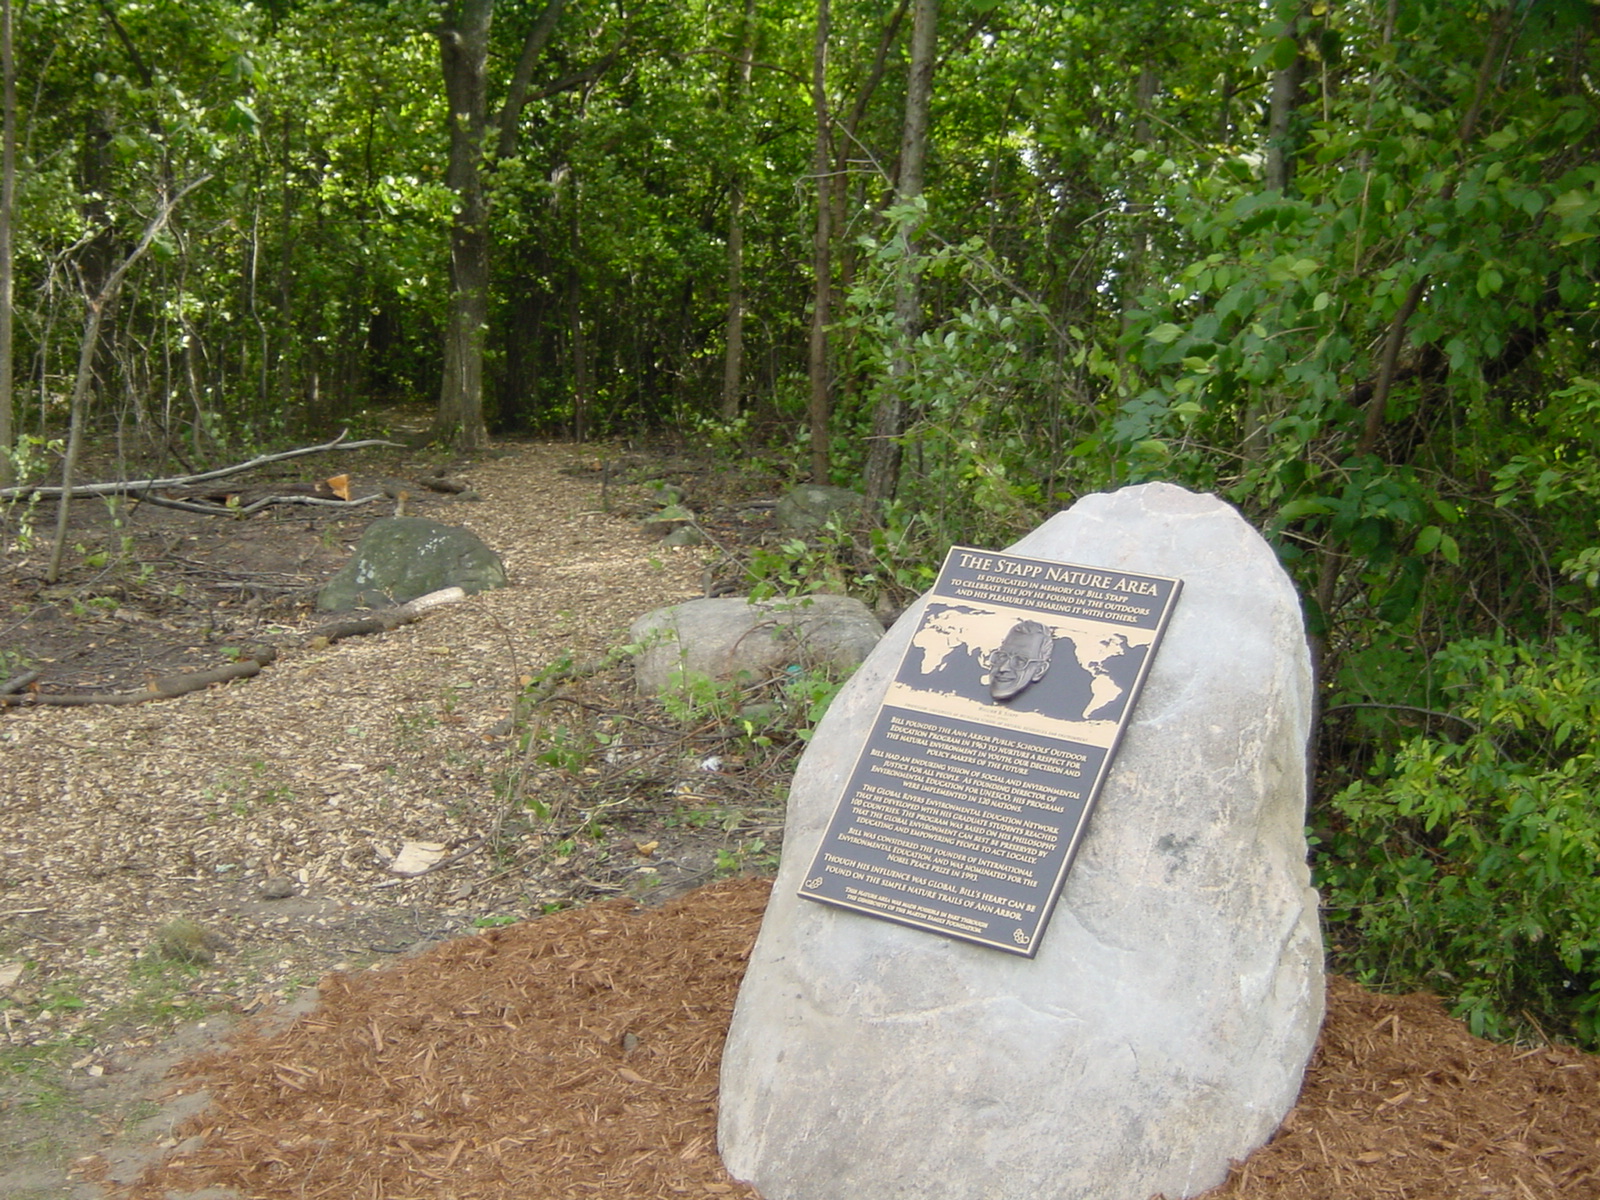 Photo of Memorial Plaque for William B. Stapp, placed at the entrance to Stapp Nature Area